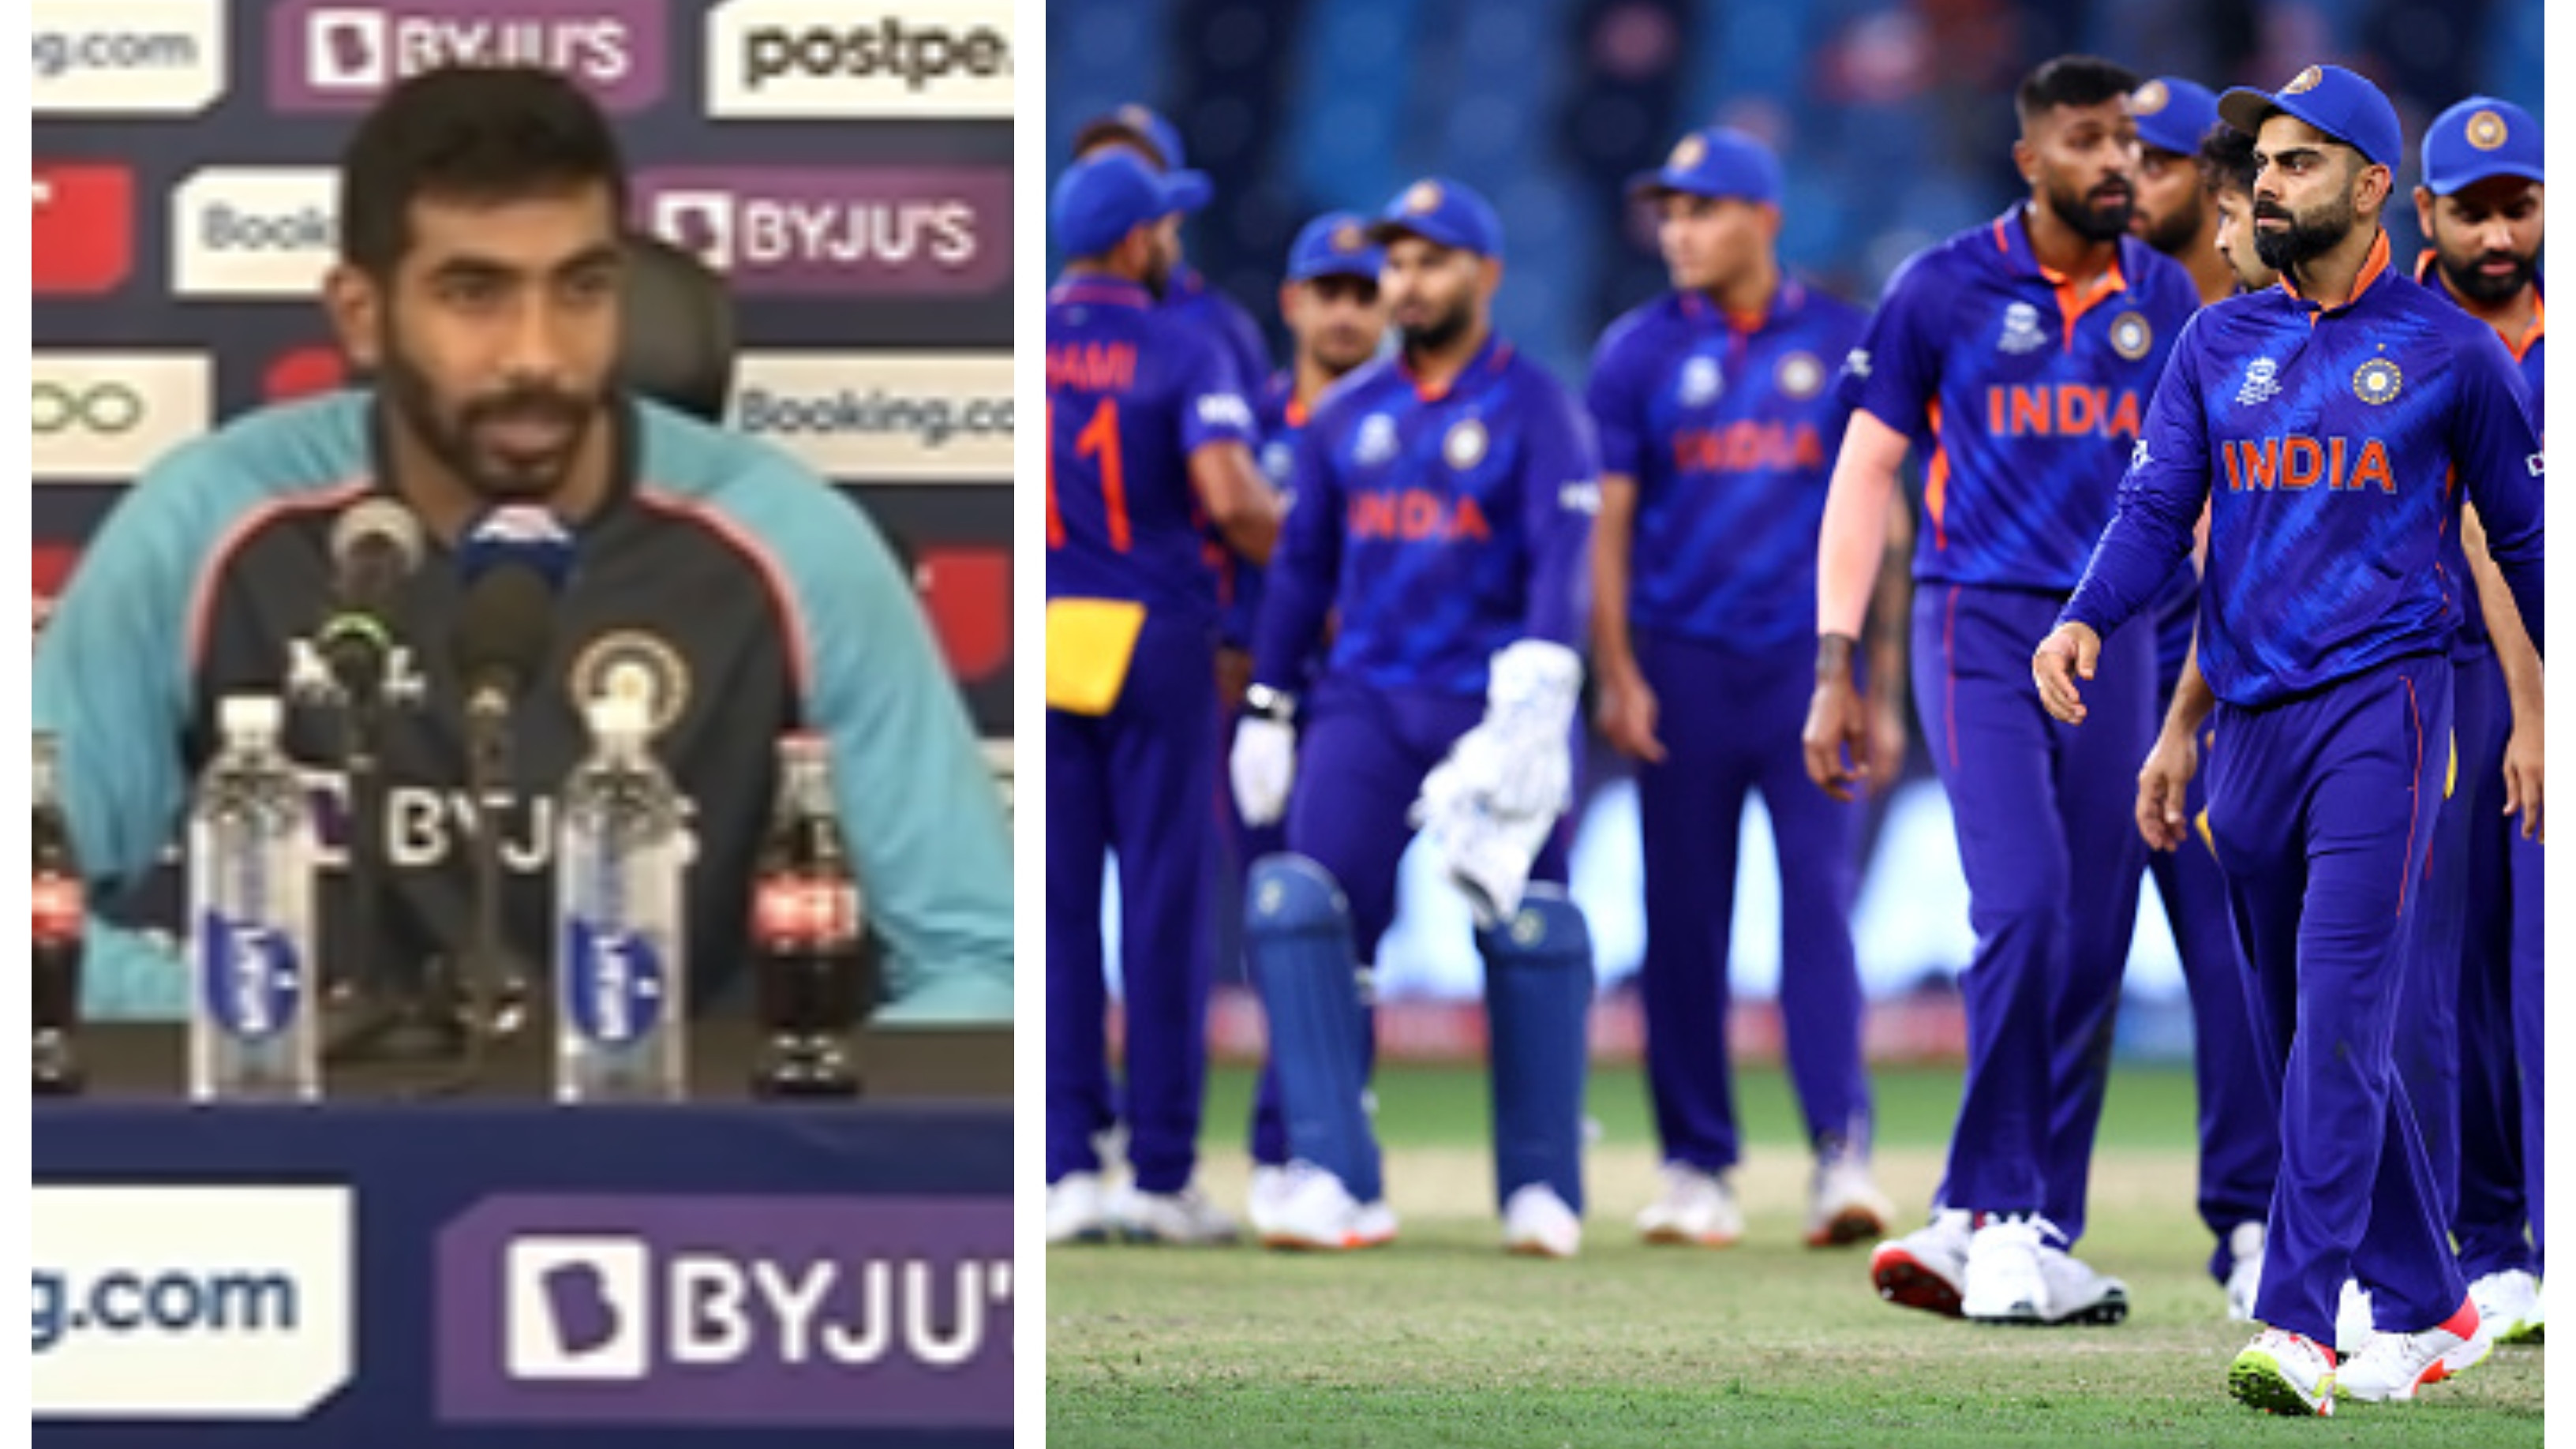 T20 World Cup 2021: ‘You need a break sometimes’, Bumrah cites bubble fatigue after India's loss to New Zealand